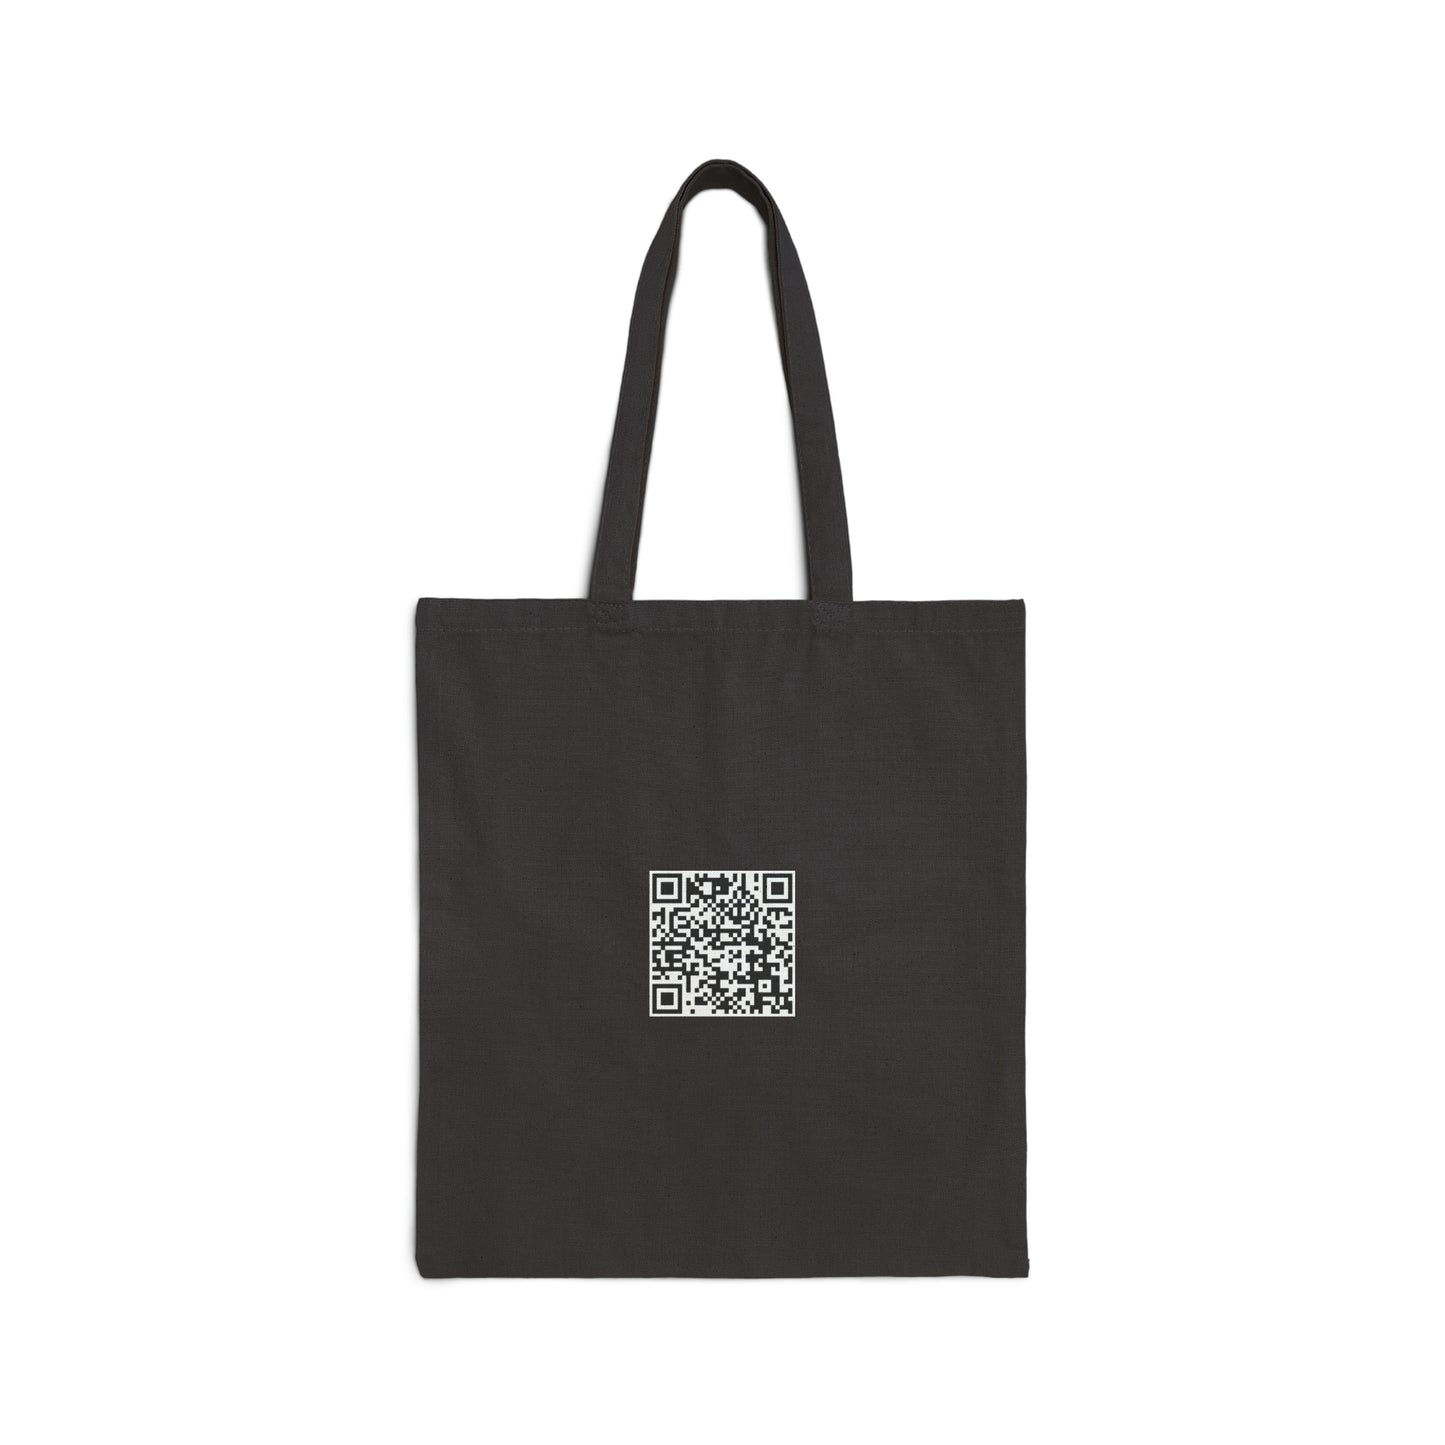 Way of the Moon Bear - Cotton Canvas Tote Bag